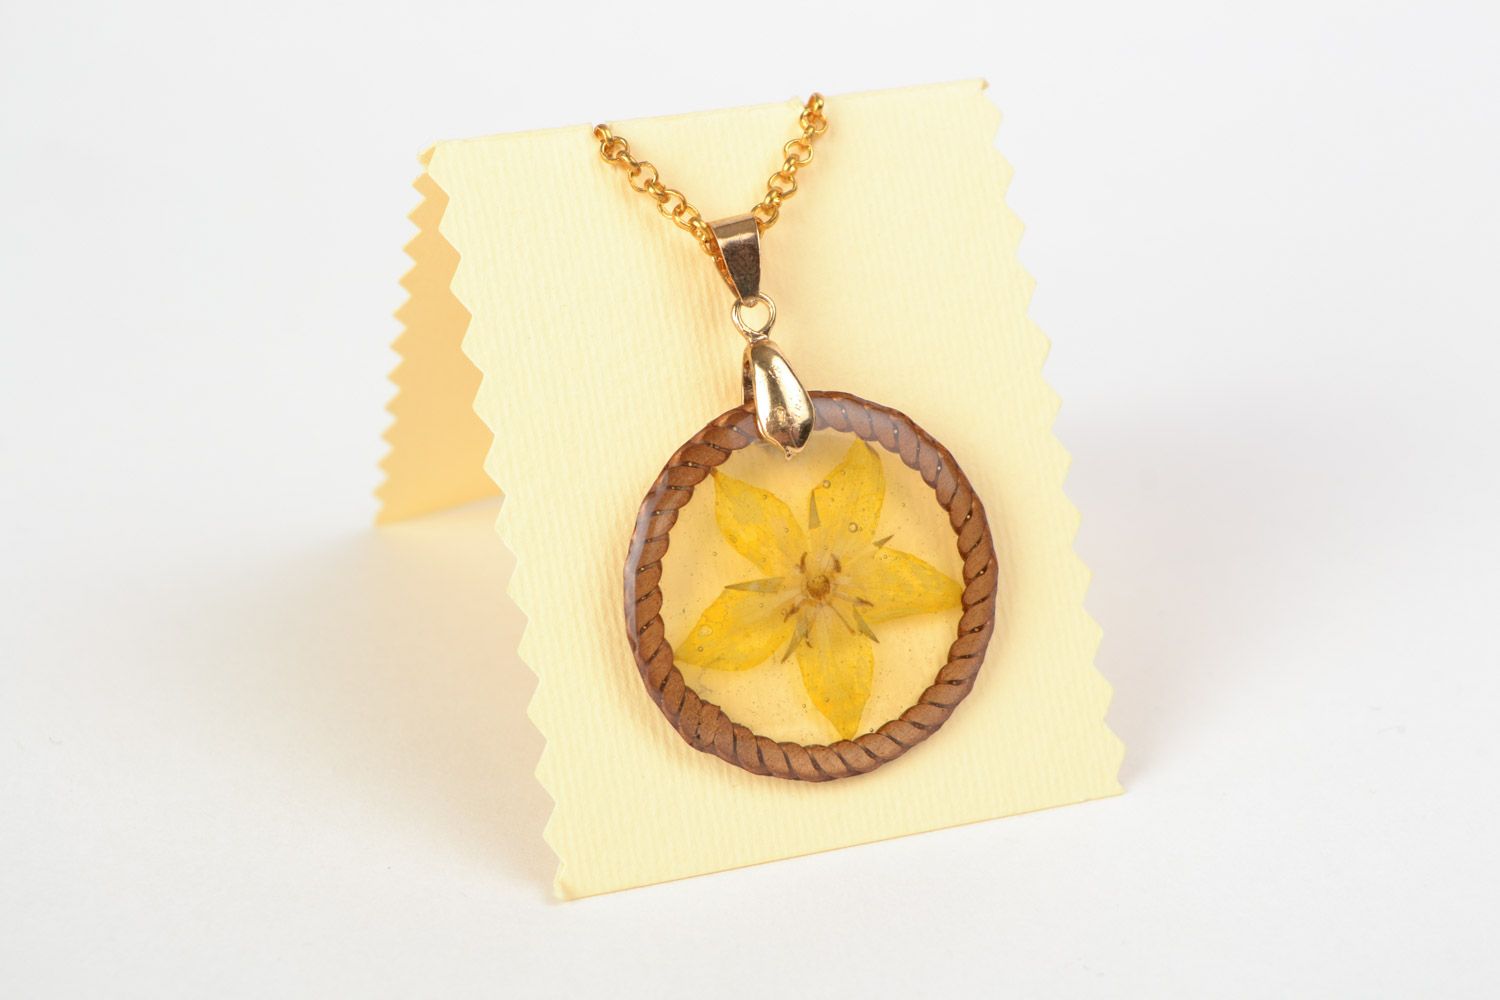 Handmade round pendant with natural dried flower embedded in epoxy resin photo 1